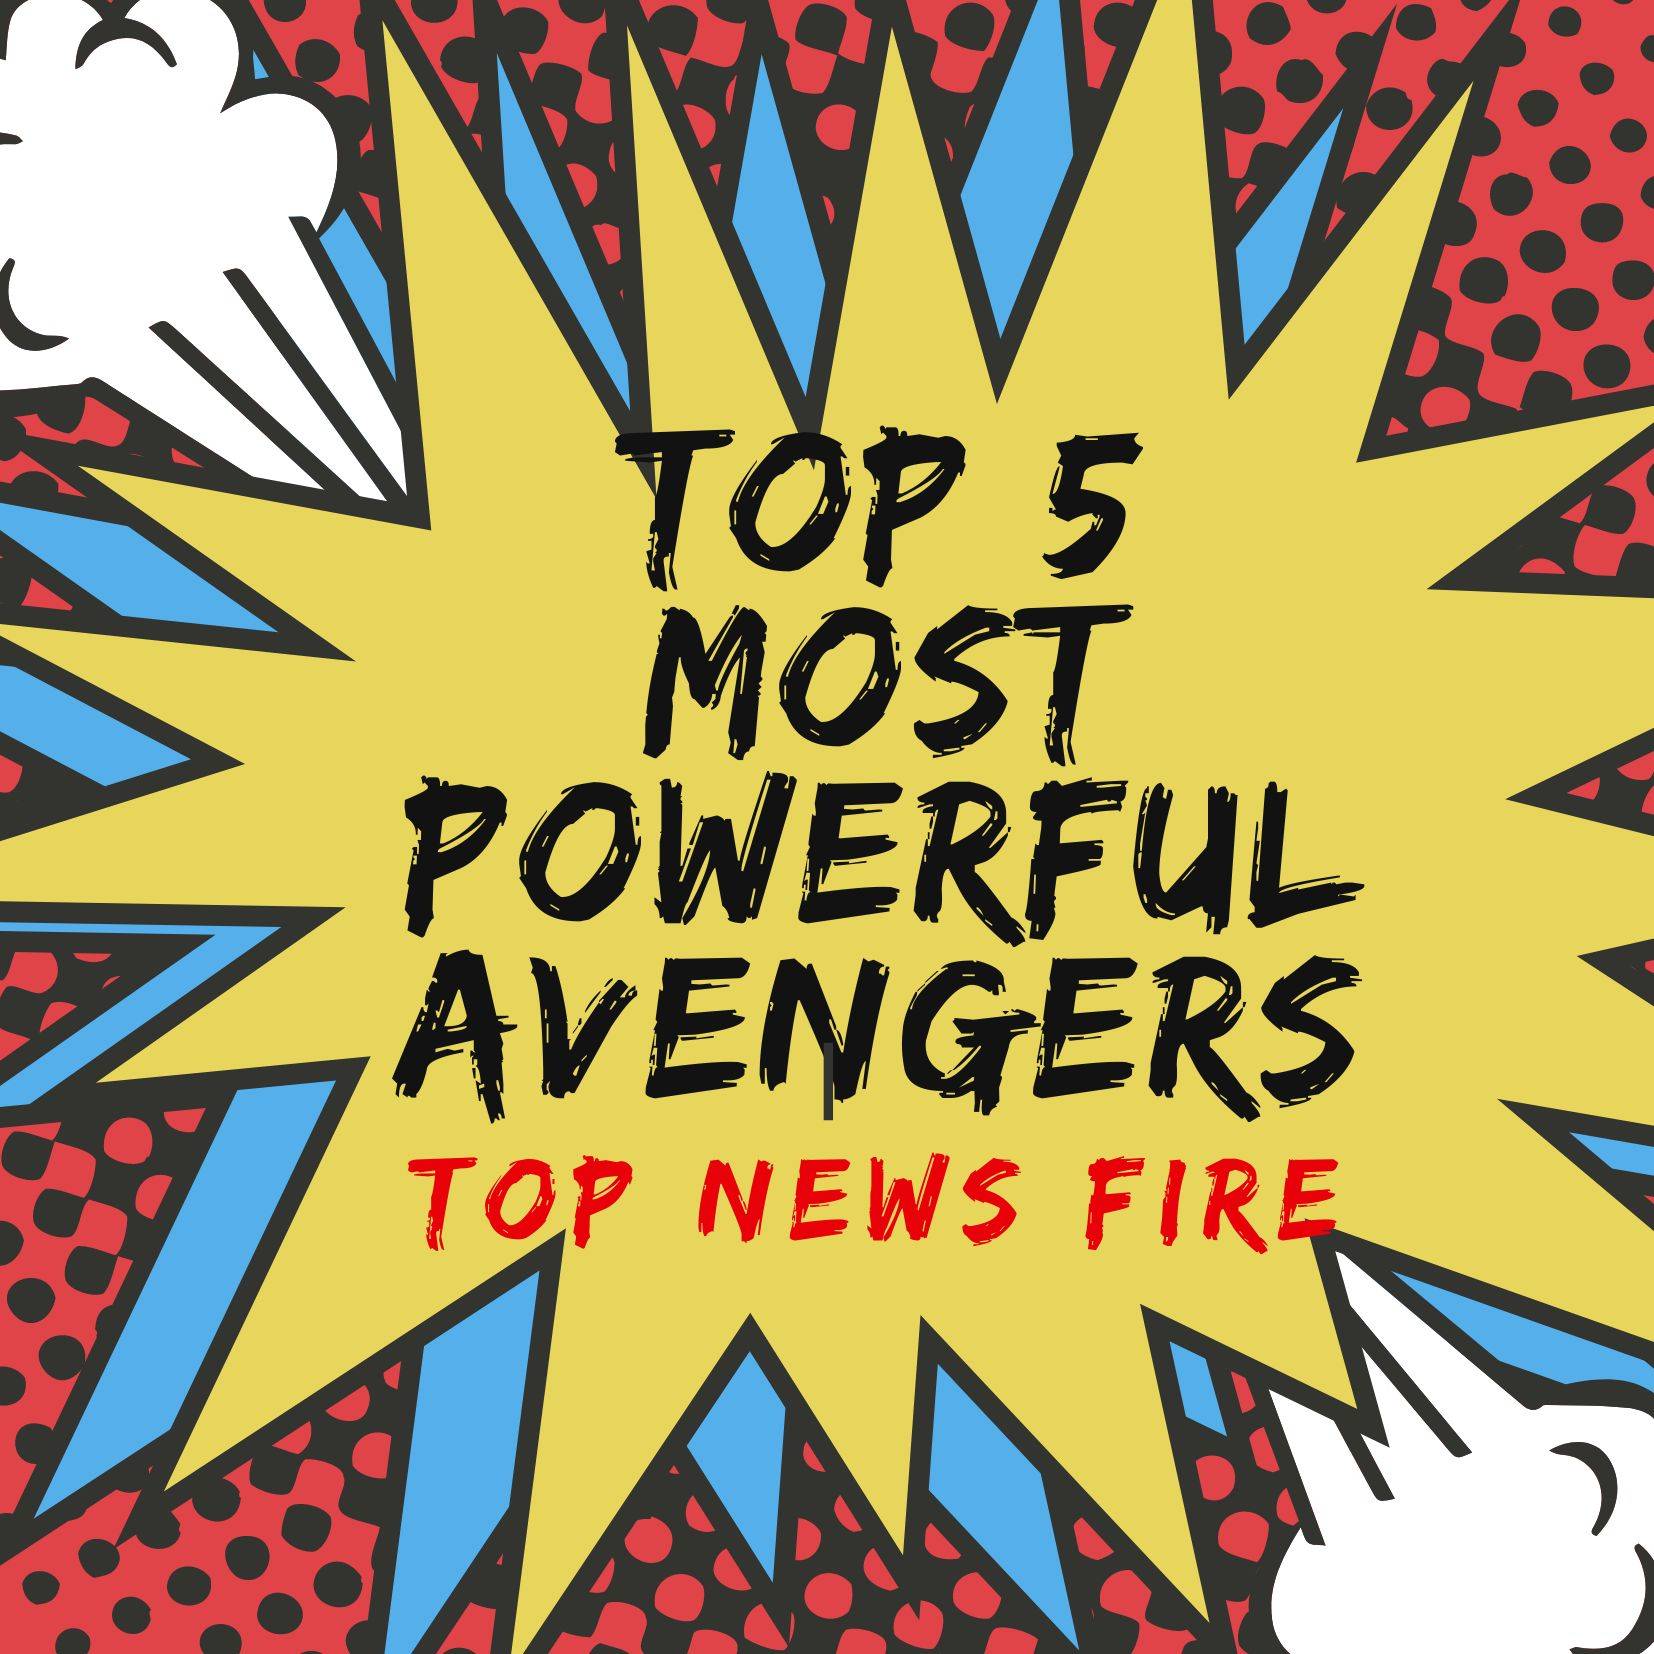 Top 5 Most Powerful Avengers